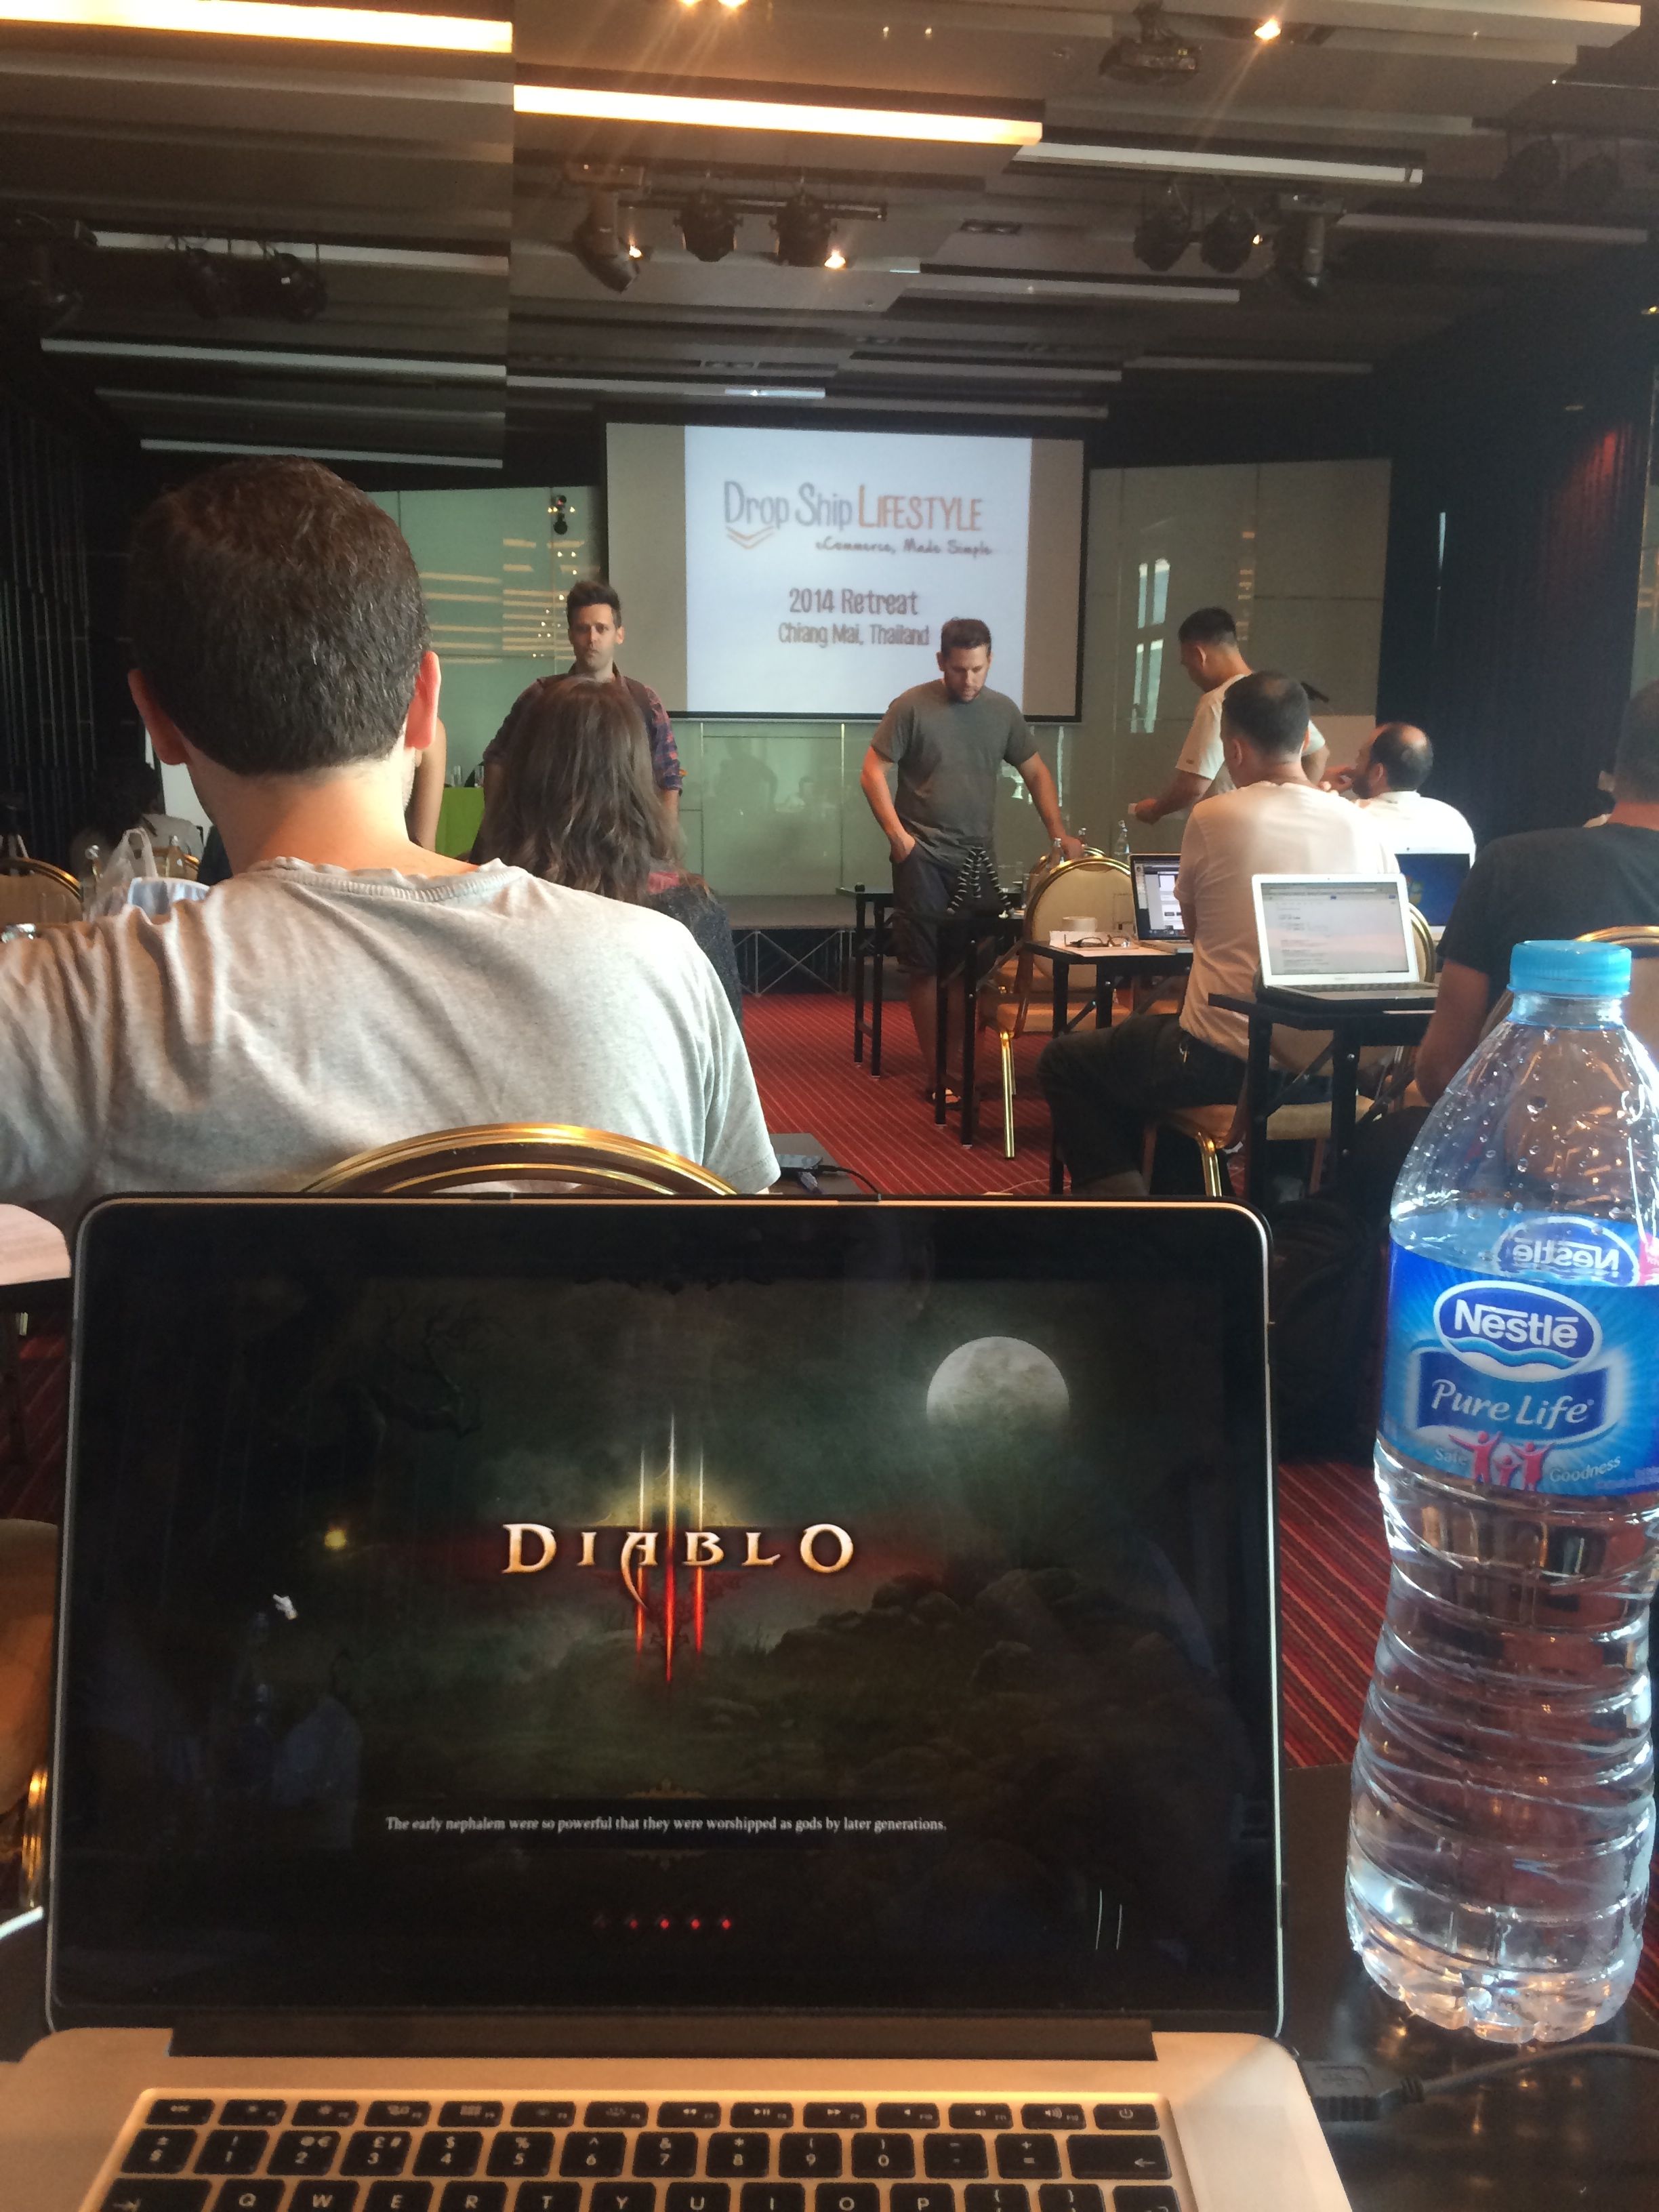 Playing Diablo 3 at the Drop Ship Lifestyle retreat in Chiang Mai :D